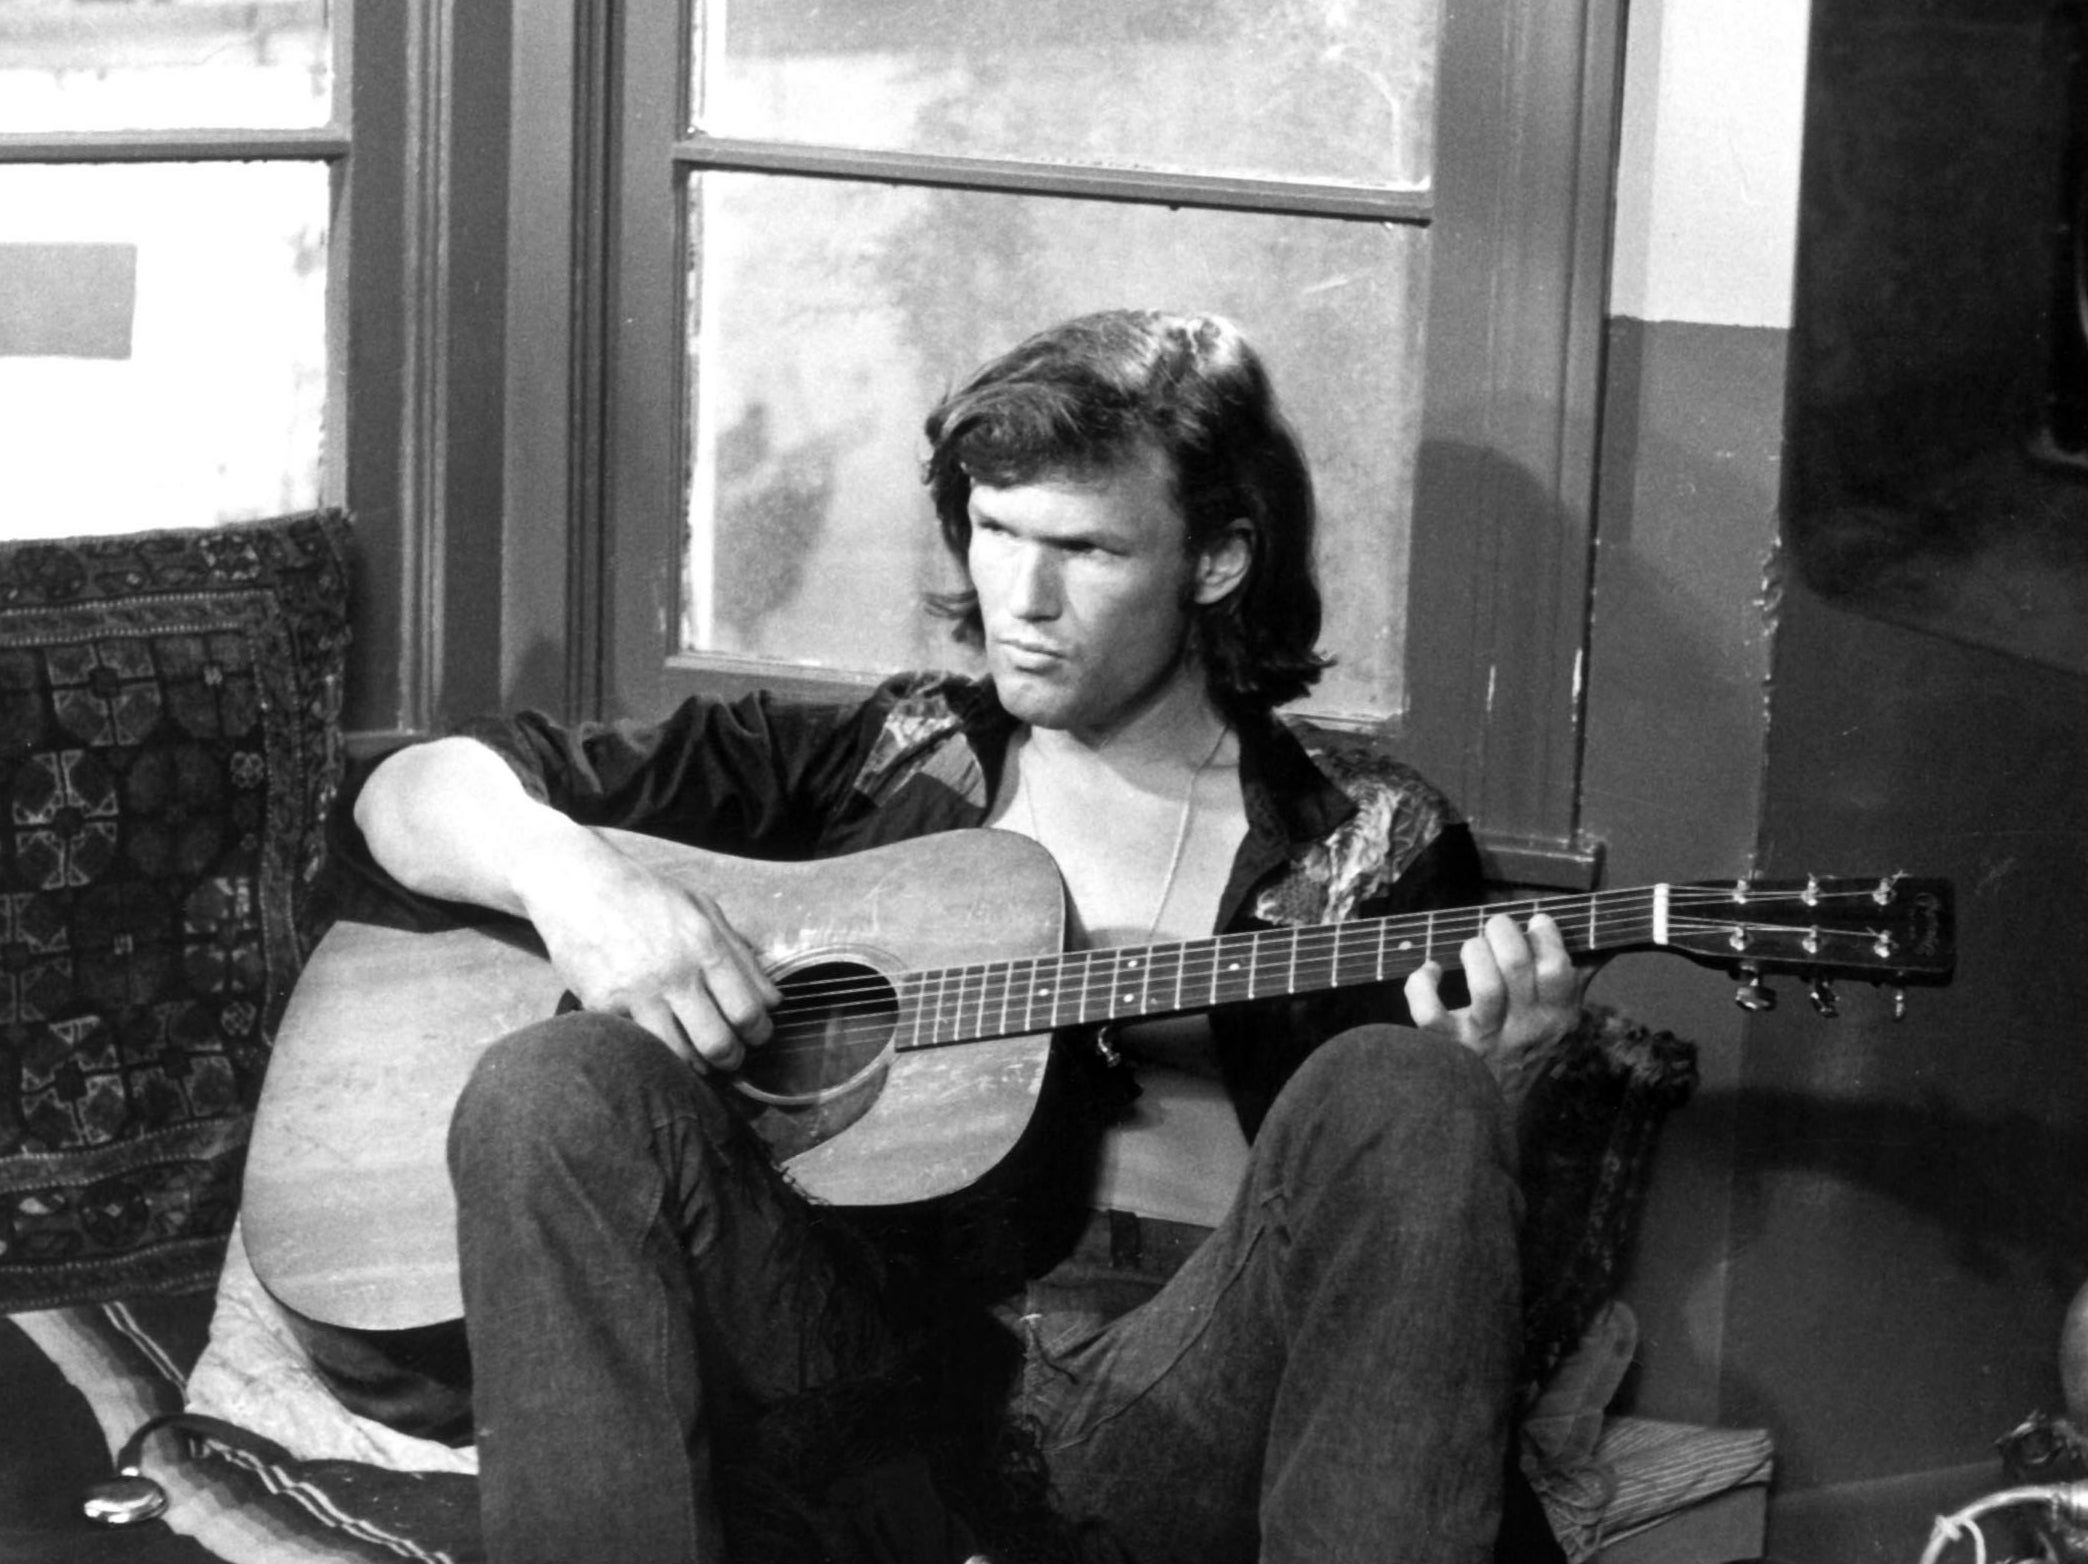 ‘I’d never even been in no school play, but I read the script and I could identify with this cat, this dope dealer’. Kris Kristofferson as a faded musician in 1972 cult movie ‘Cisco Pike’